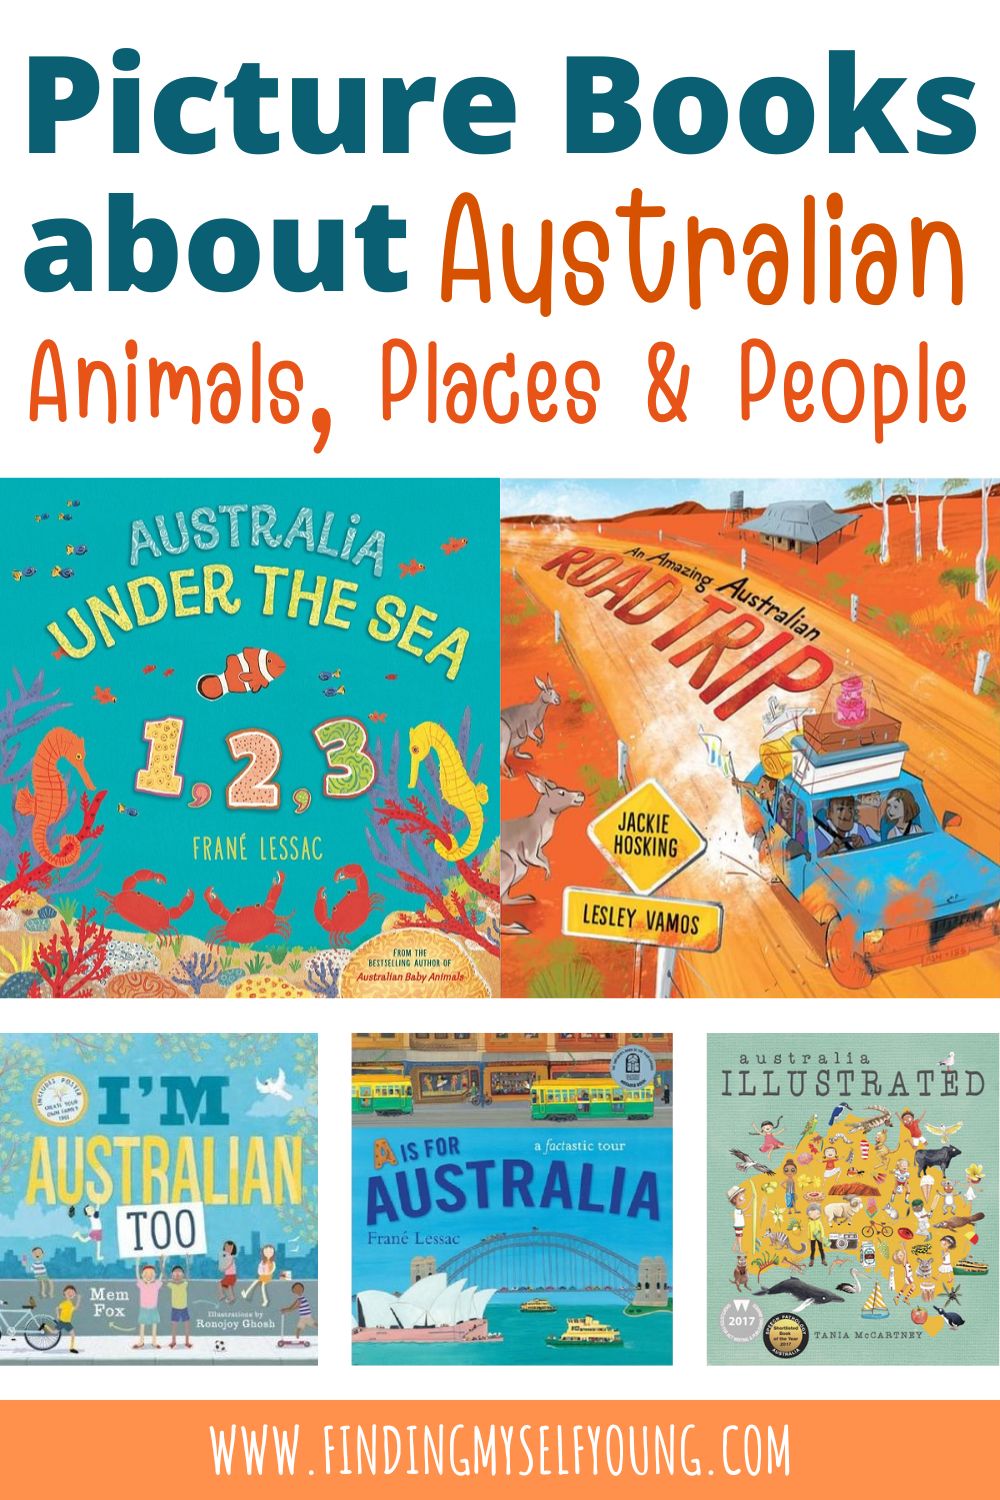 picture books about Australian animals, people and places